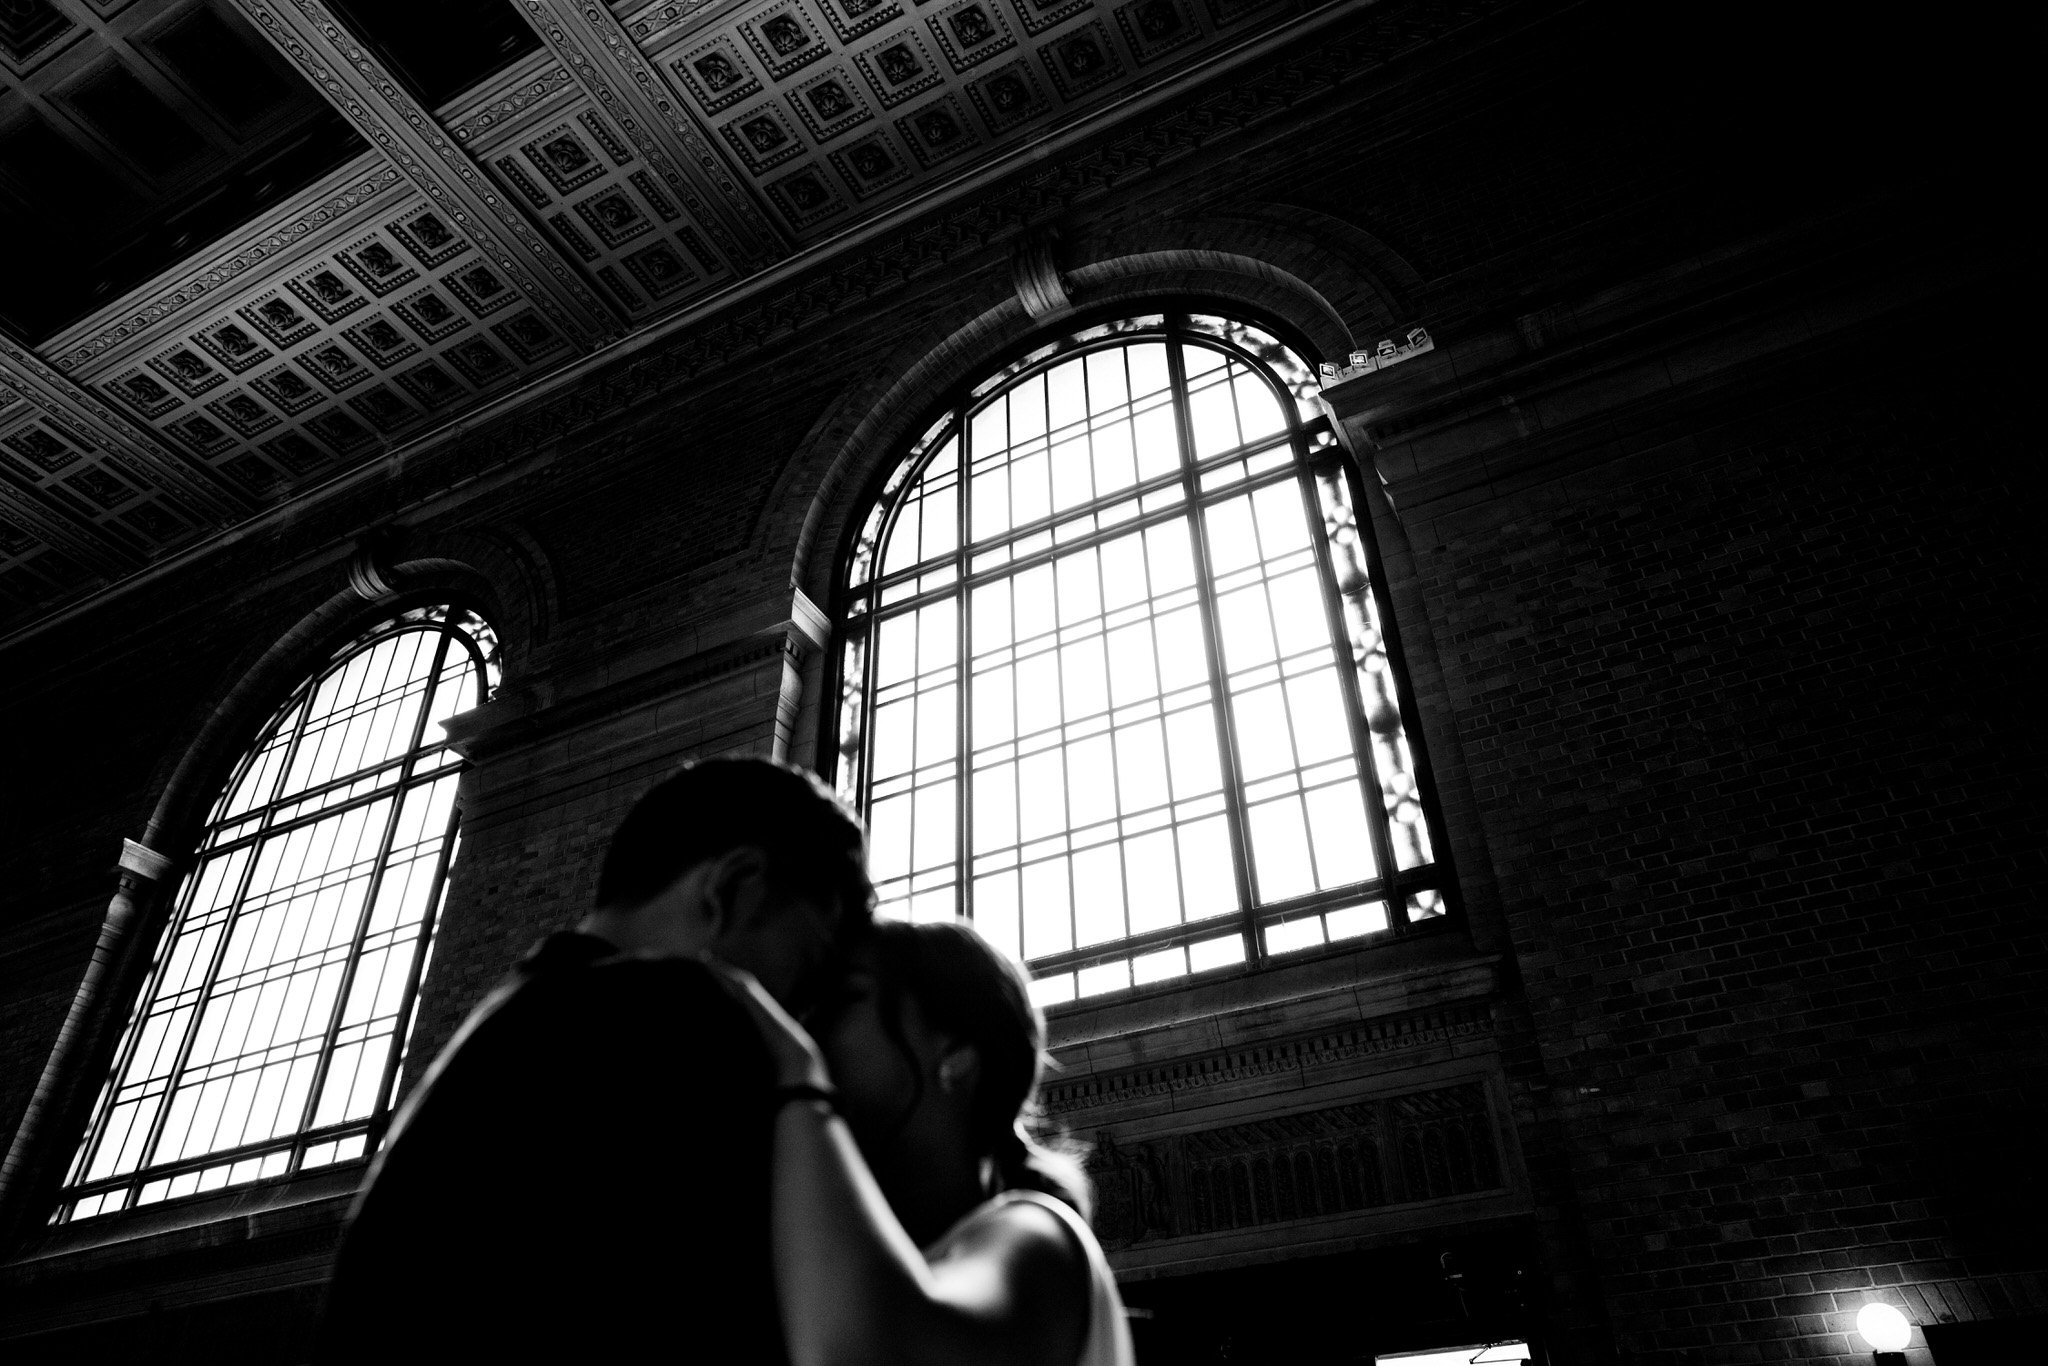 auckland-wedding-photographer-videographer-story-by-koo-koo's-jewelry-dear-white-productions-old-train-station-new-zealand-moody-historical-pre-wedding-engagement-photo (5).JPG